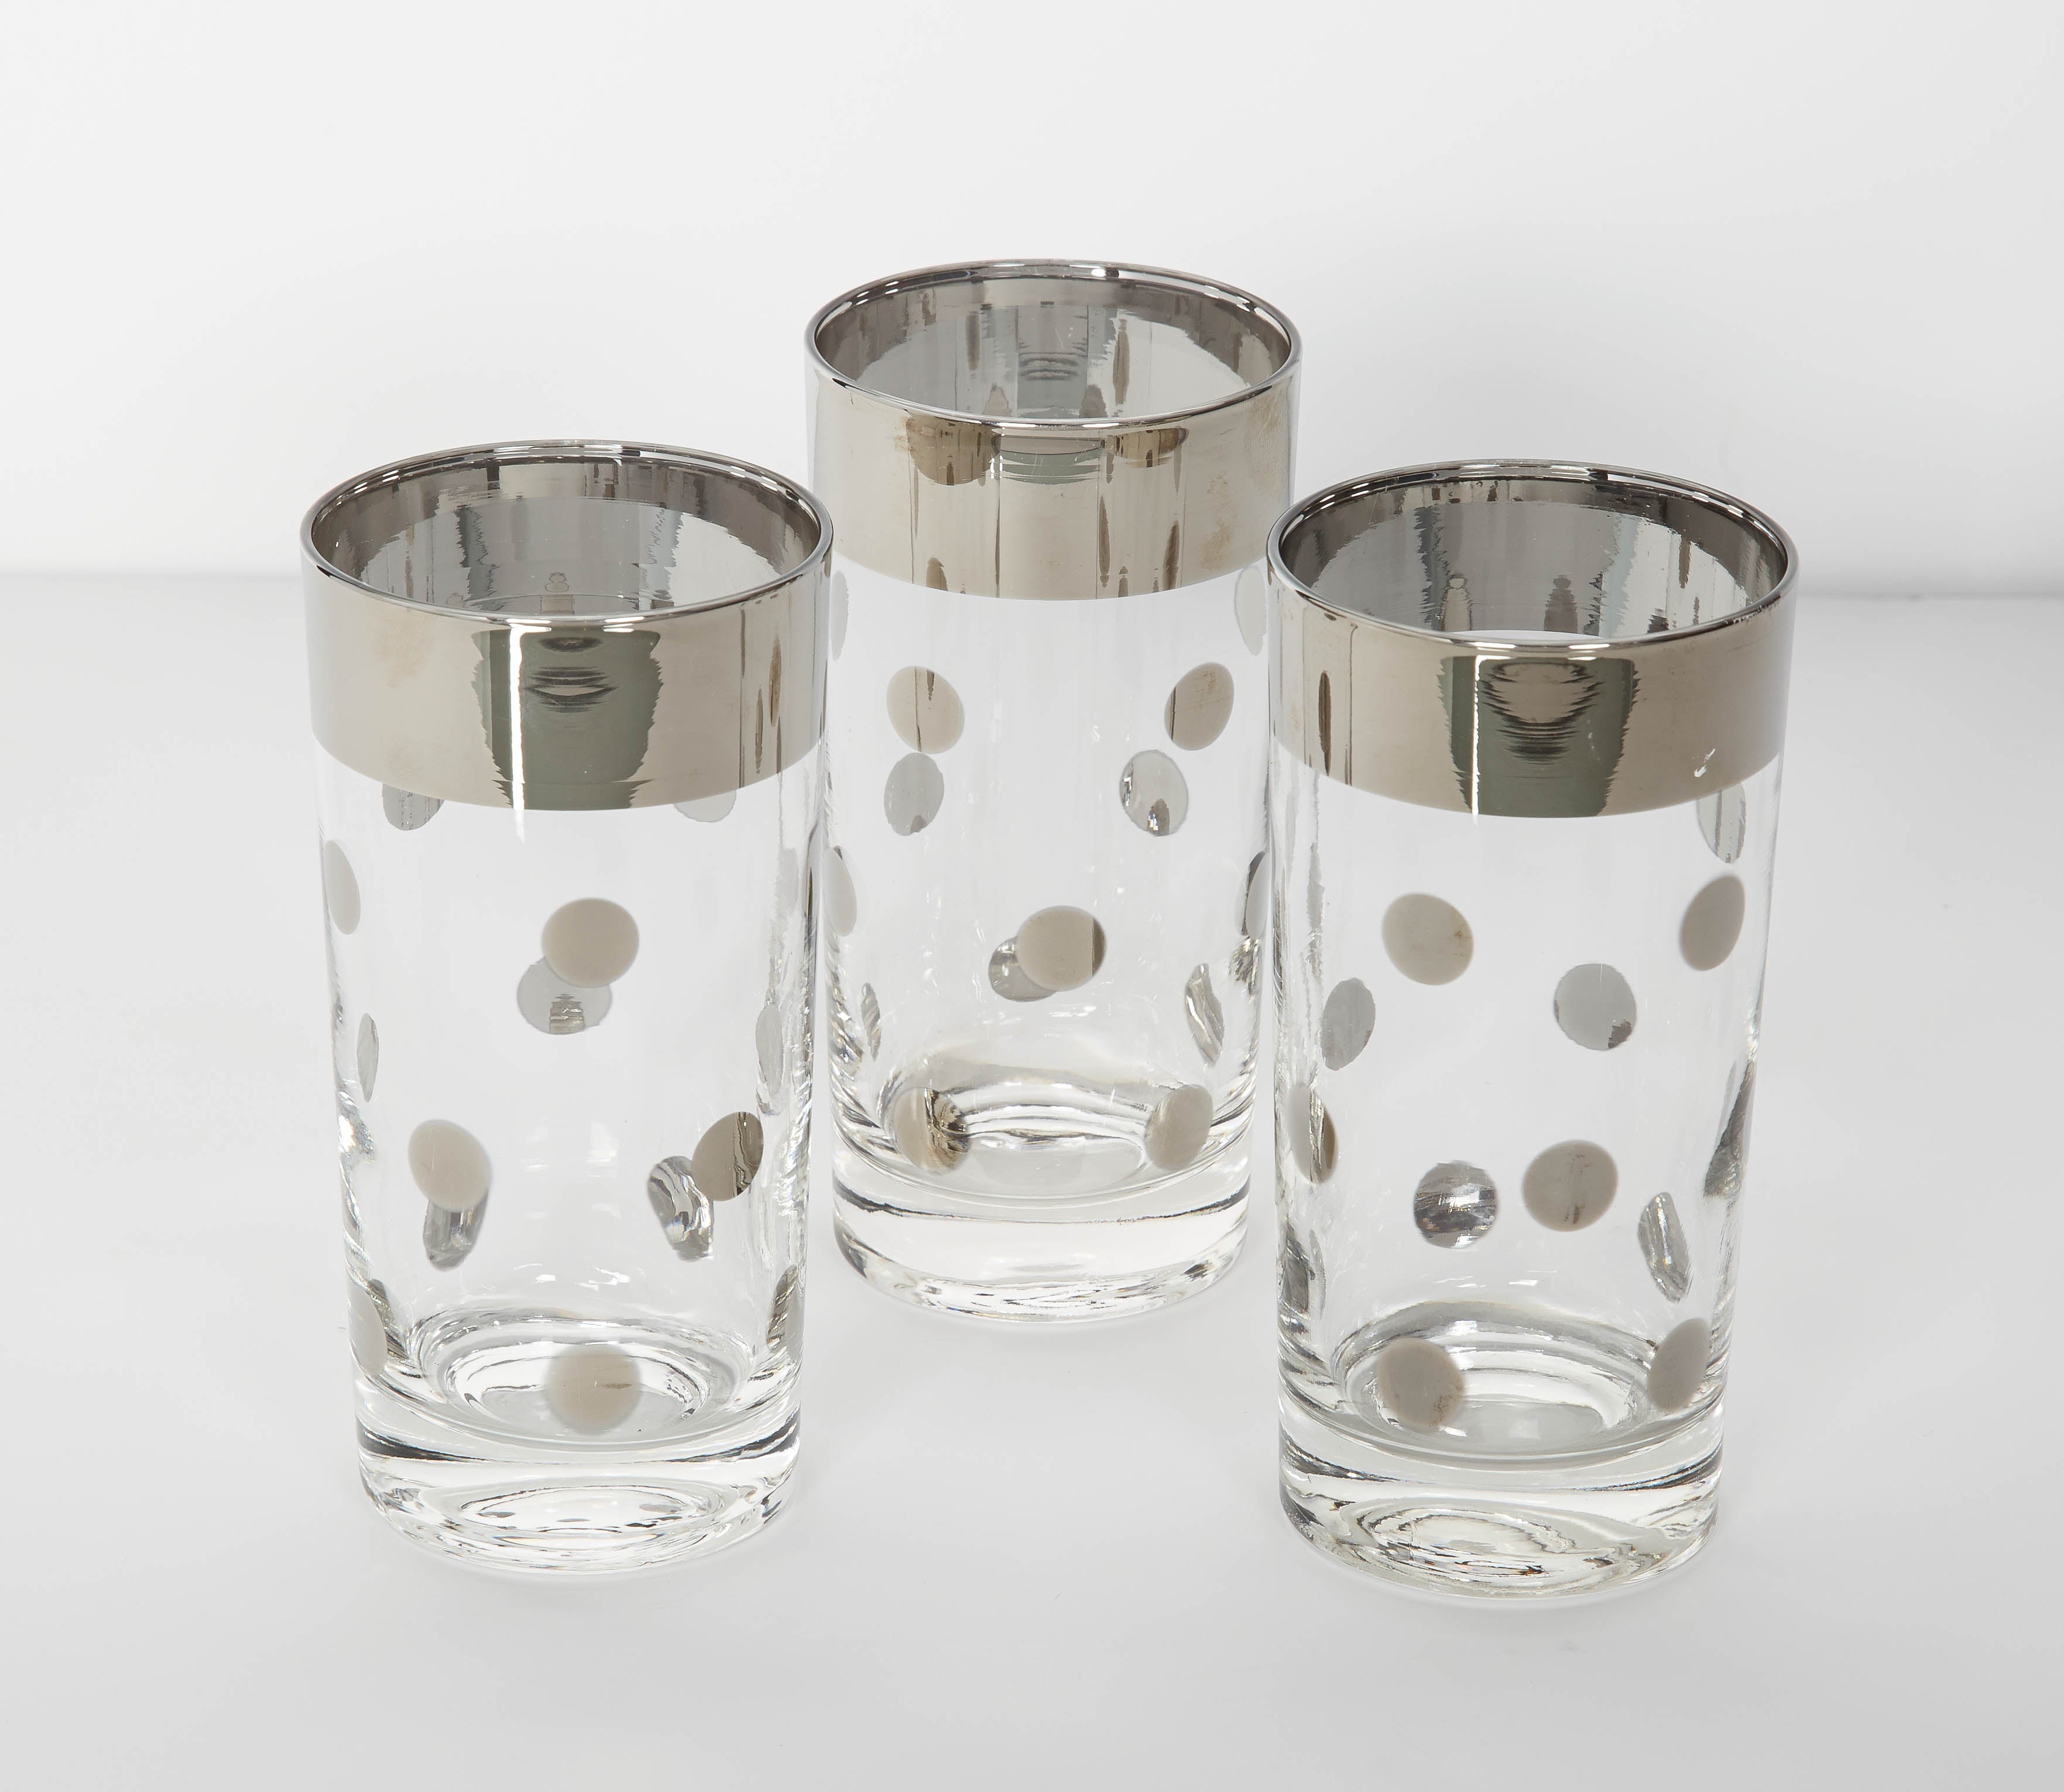 American Set of 10 Mid-Century Barware Glasses with Polka Dot Design by Dorothy Thorpe